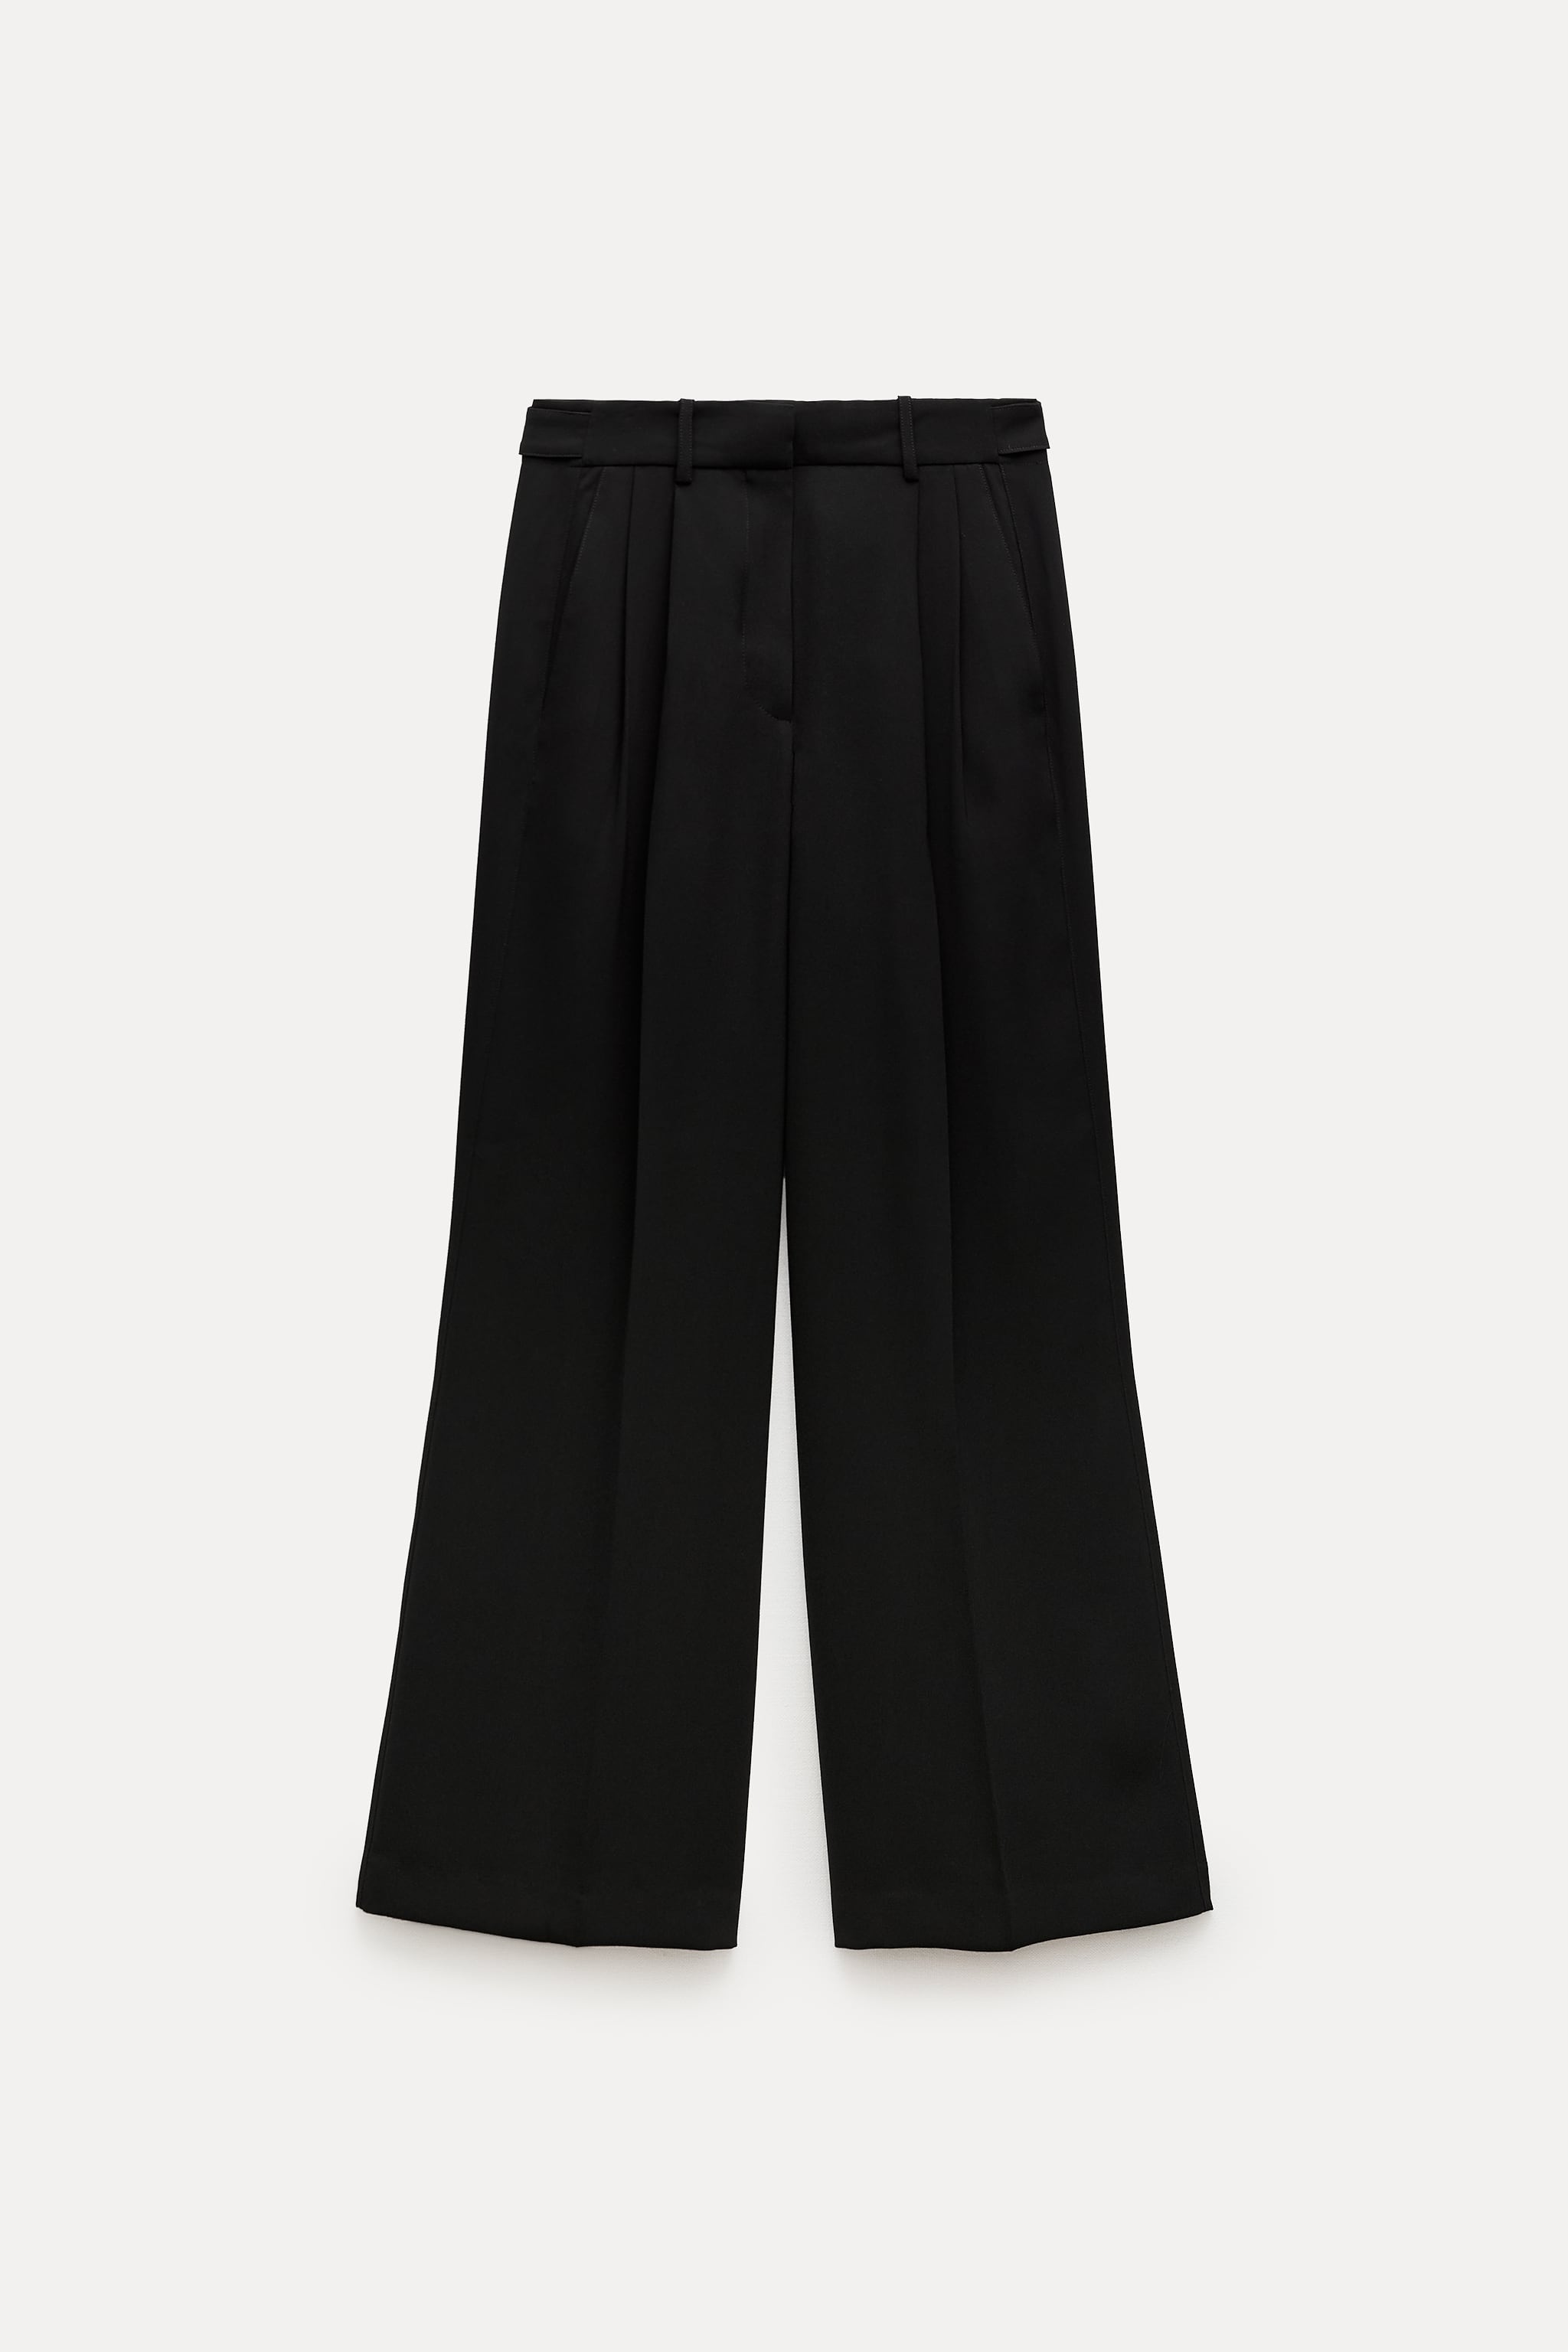 MENSWEAR STYLE PLEATED PANTS ZW COLLECTION